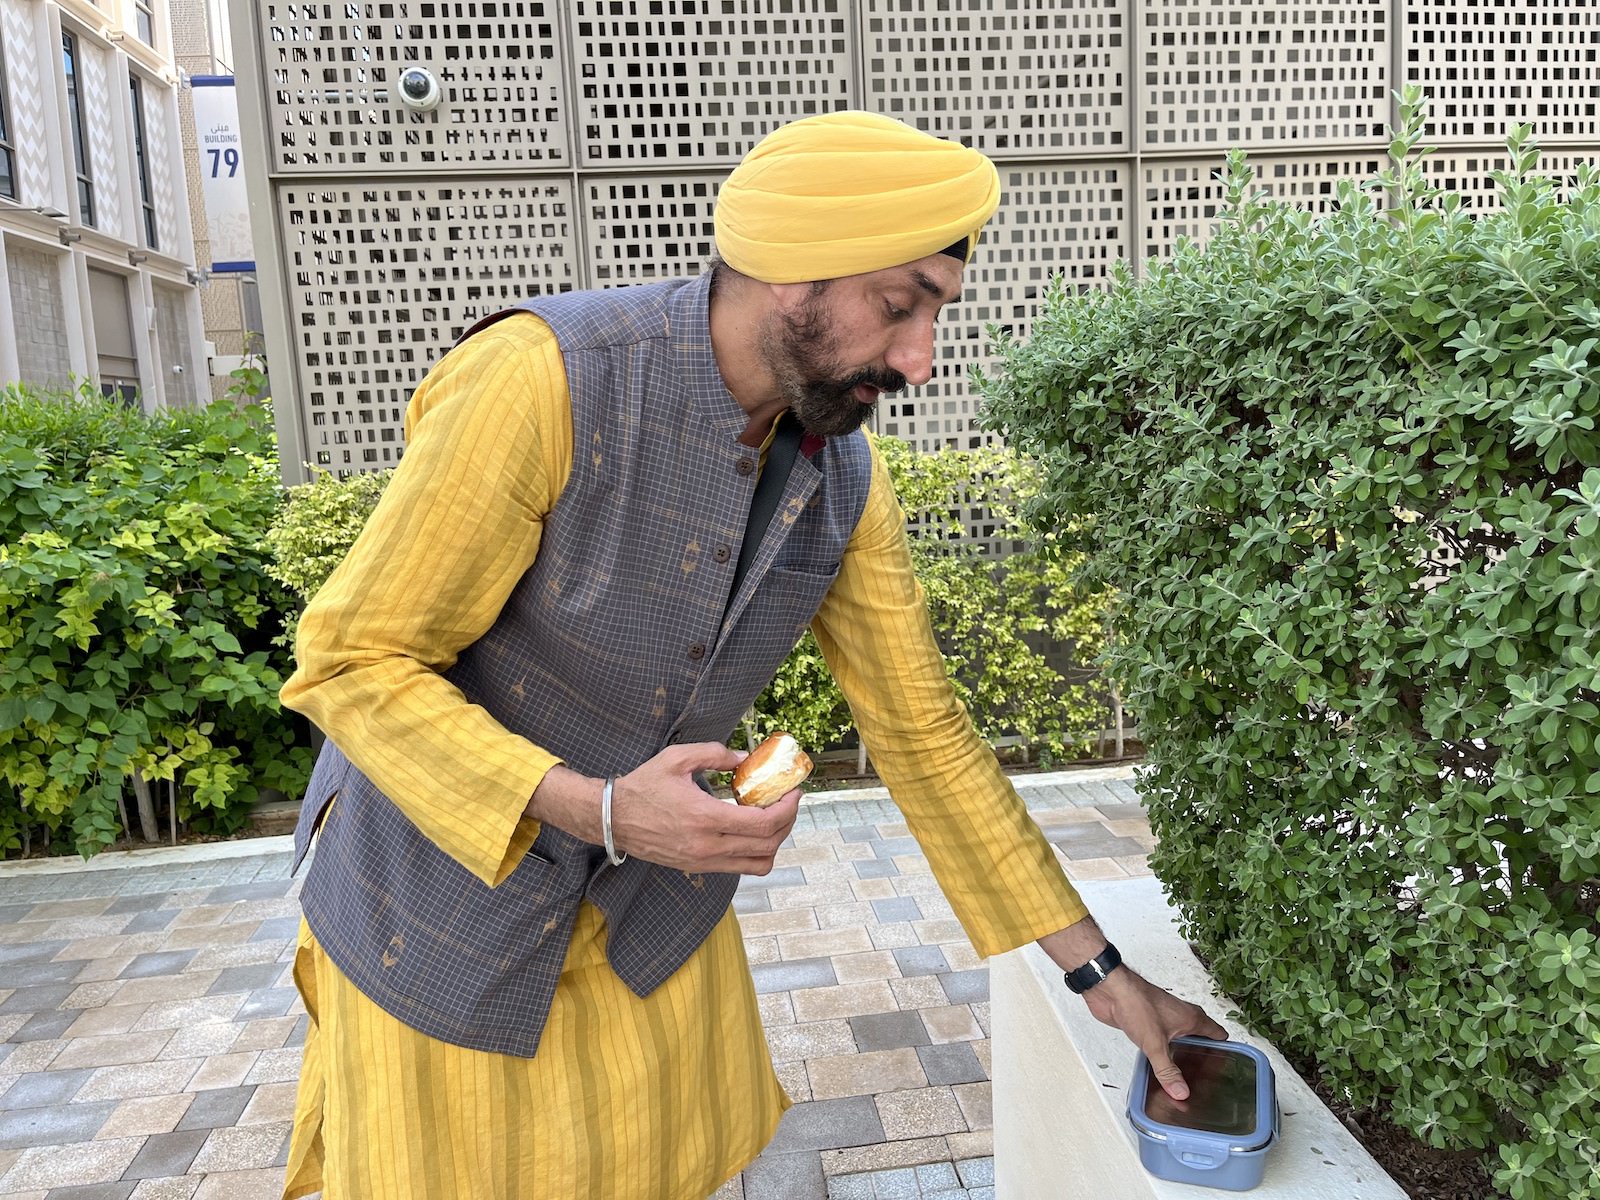 A man in a yellow turban and shirt reaches for a container in a courtyard with greenery and bricks